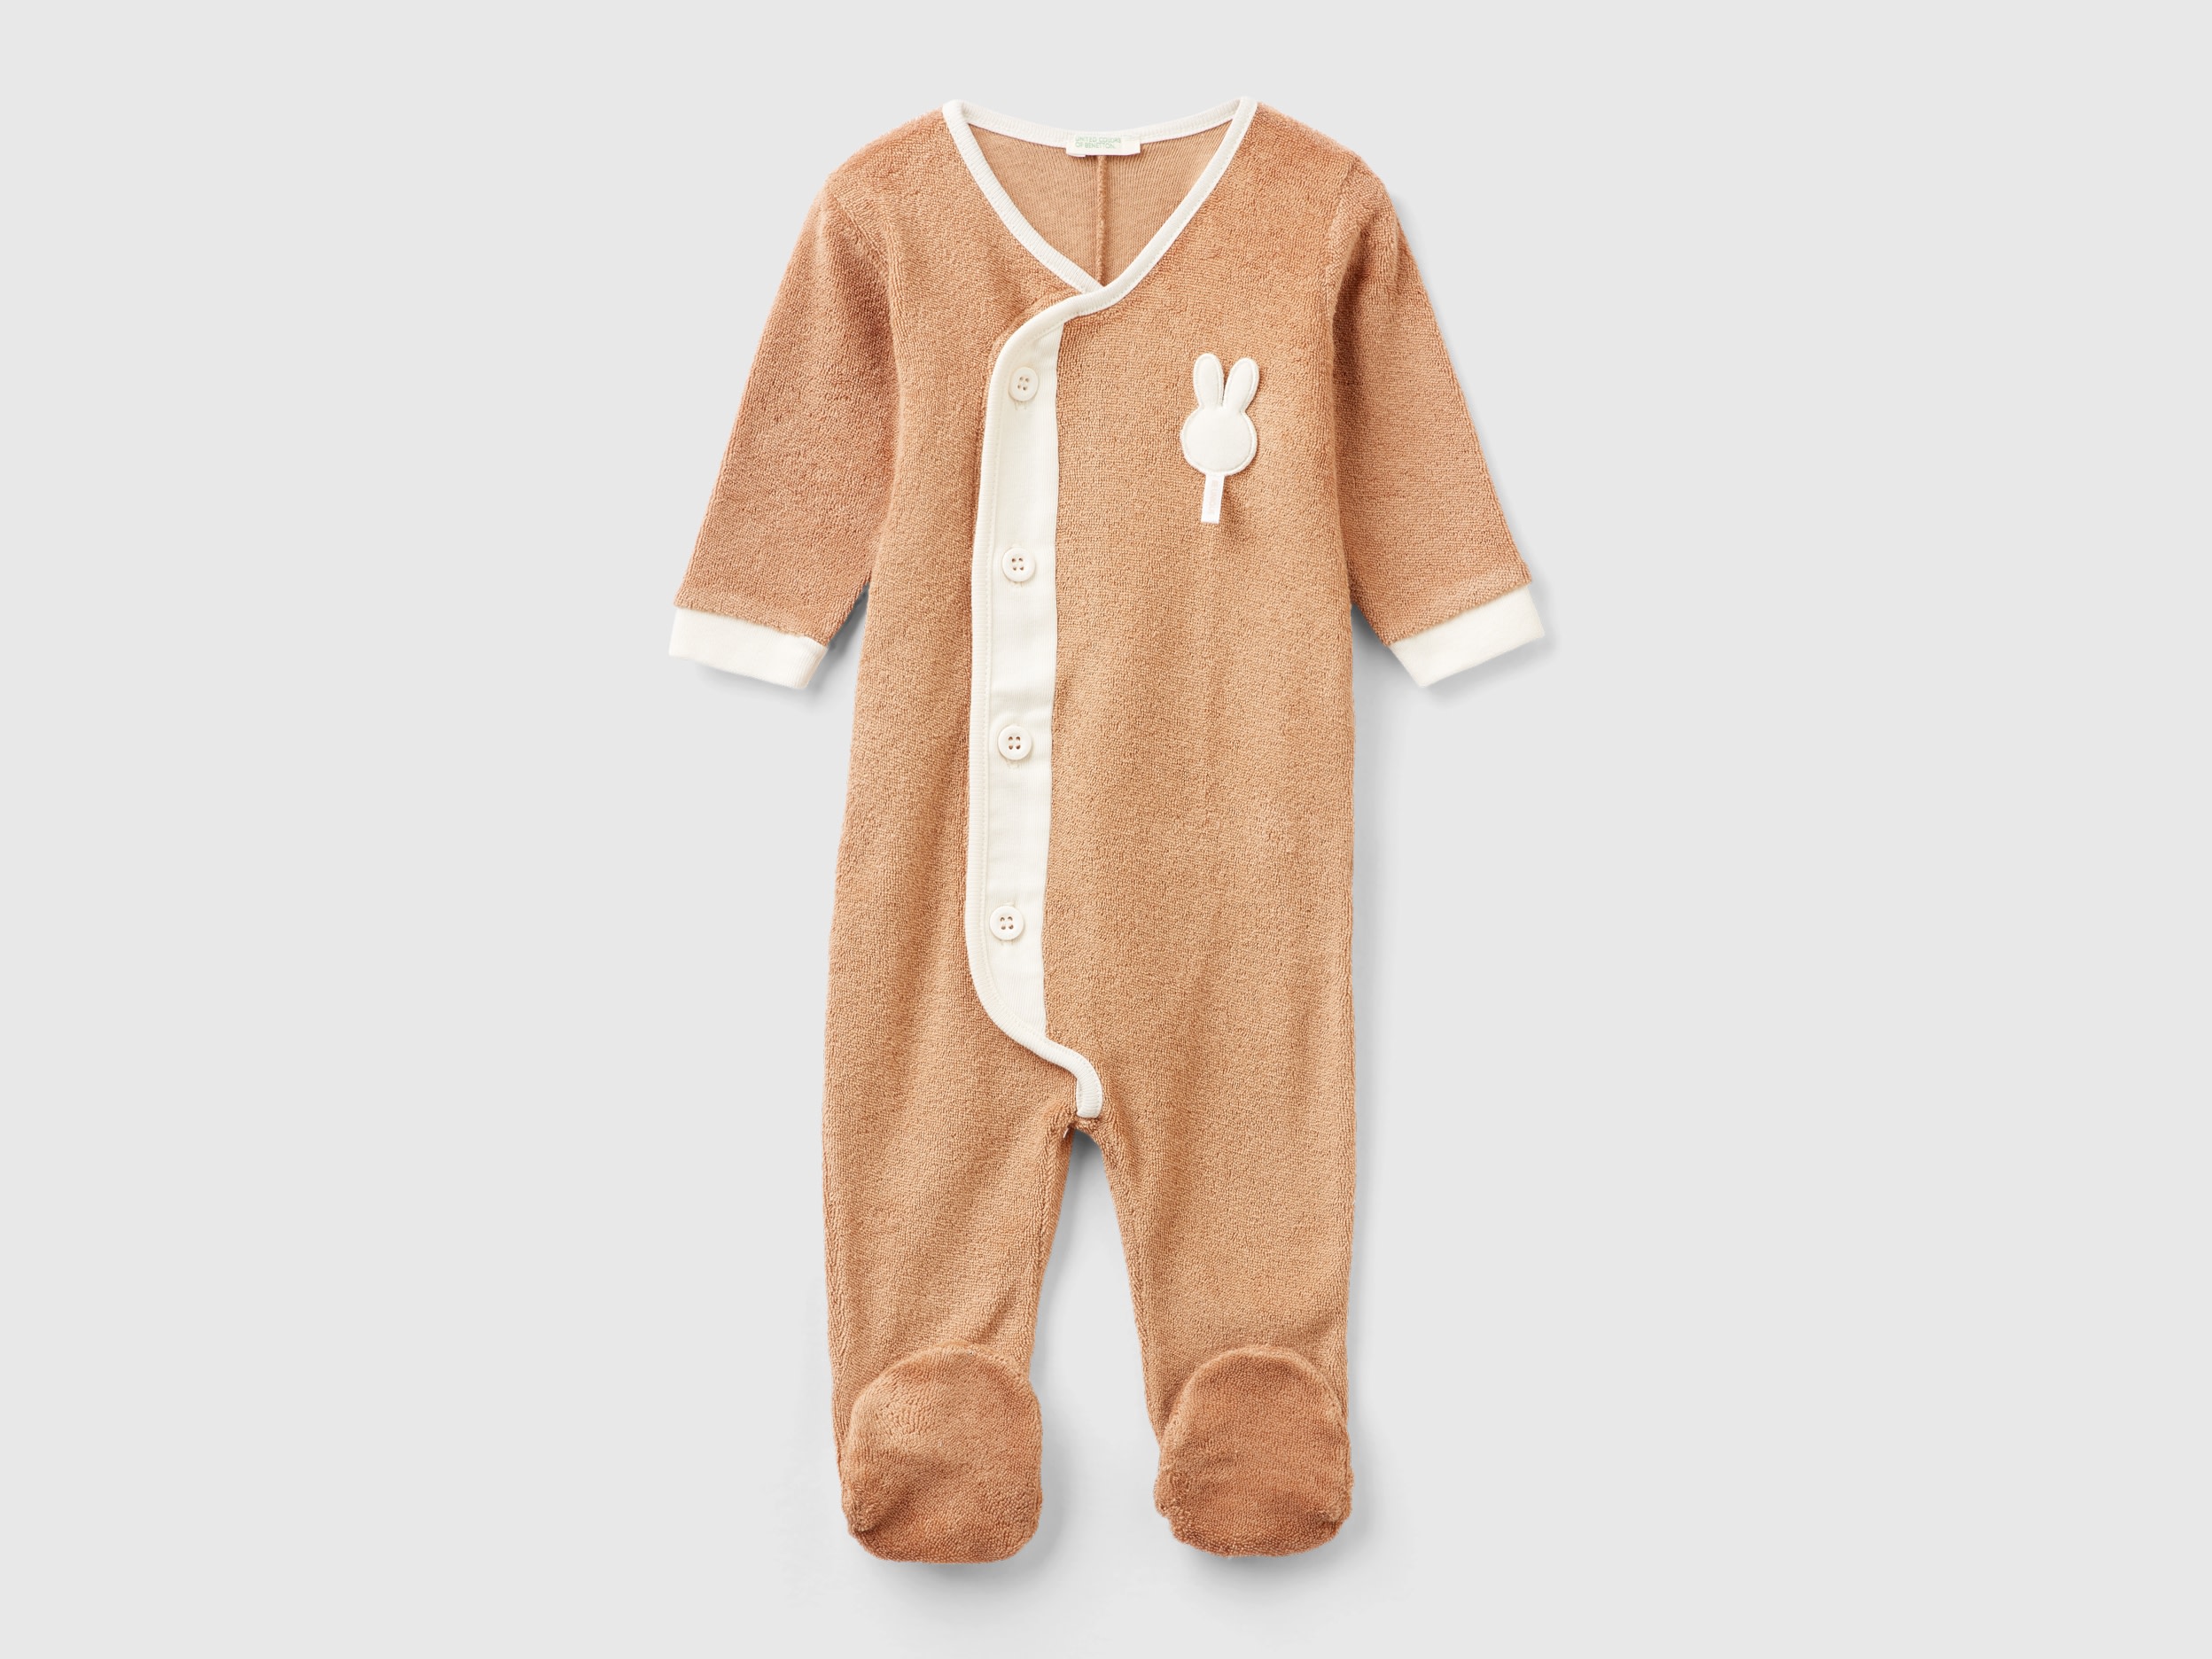 Benetton, Onesie In Terry Cloth With Patch, size 12-18, Camel, Kids